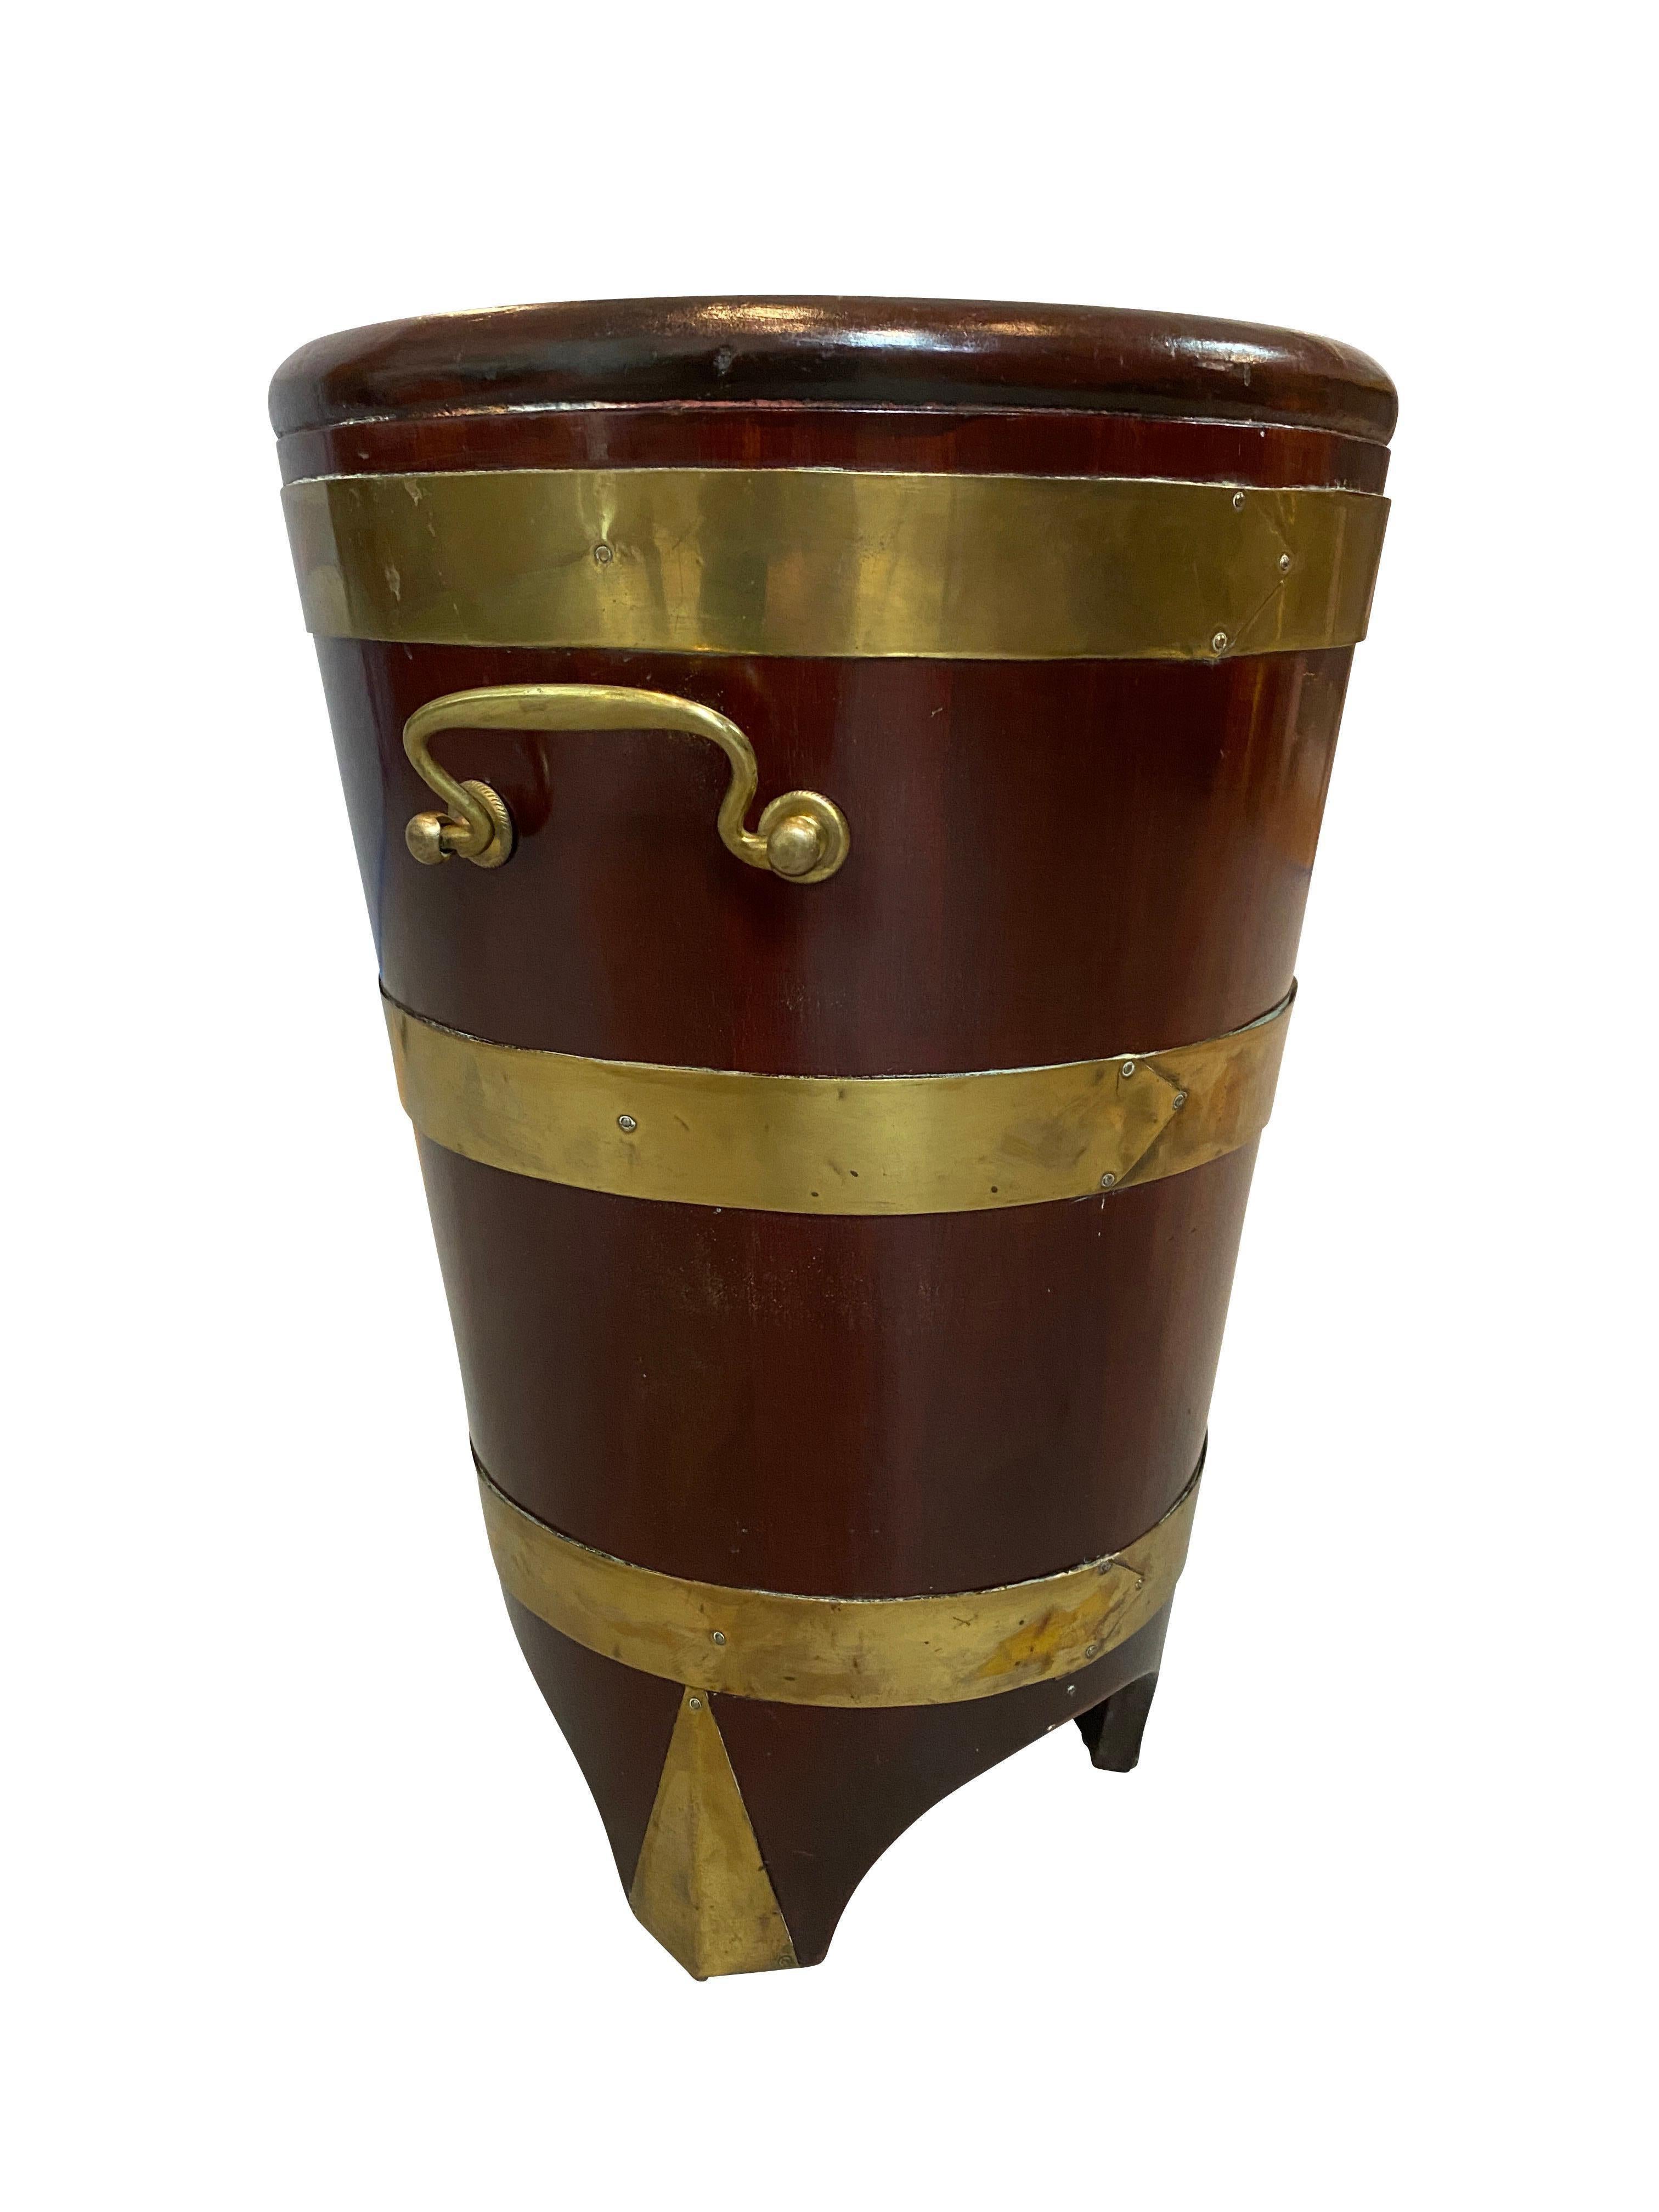 Tapered cylindrical form with three brass rings ending on three bracket feet with triangular brass applied panels. Brass bail handles.